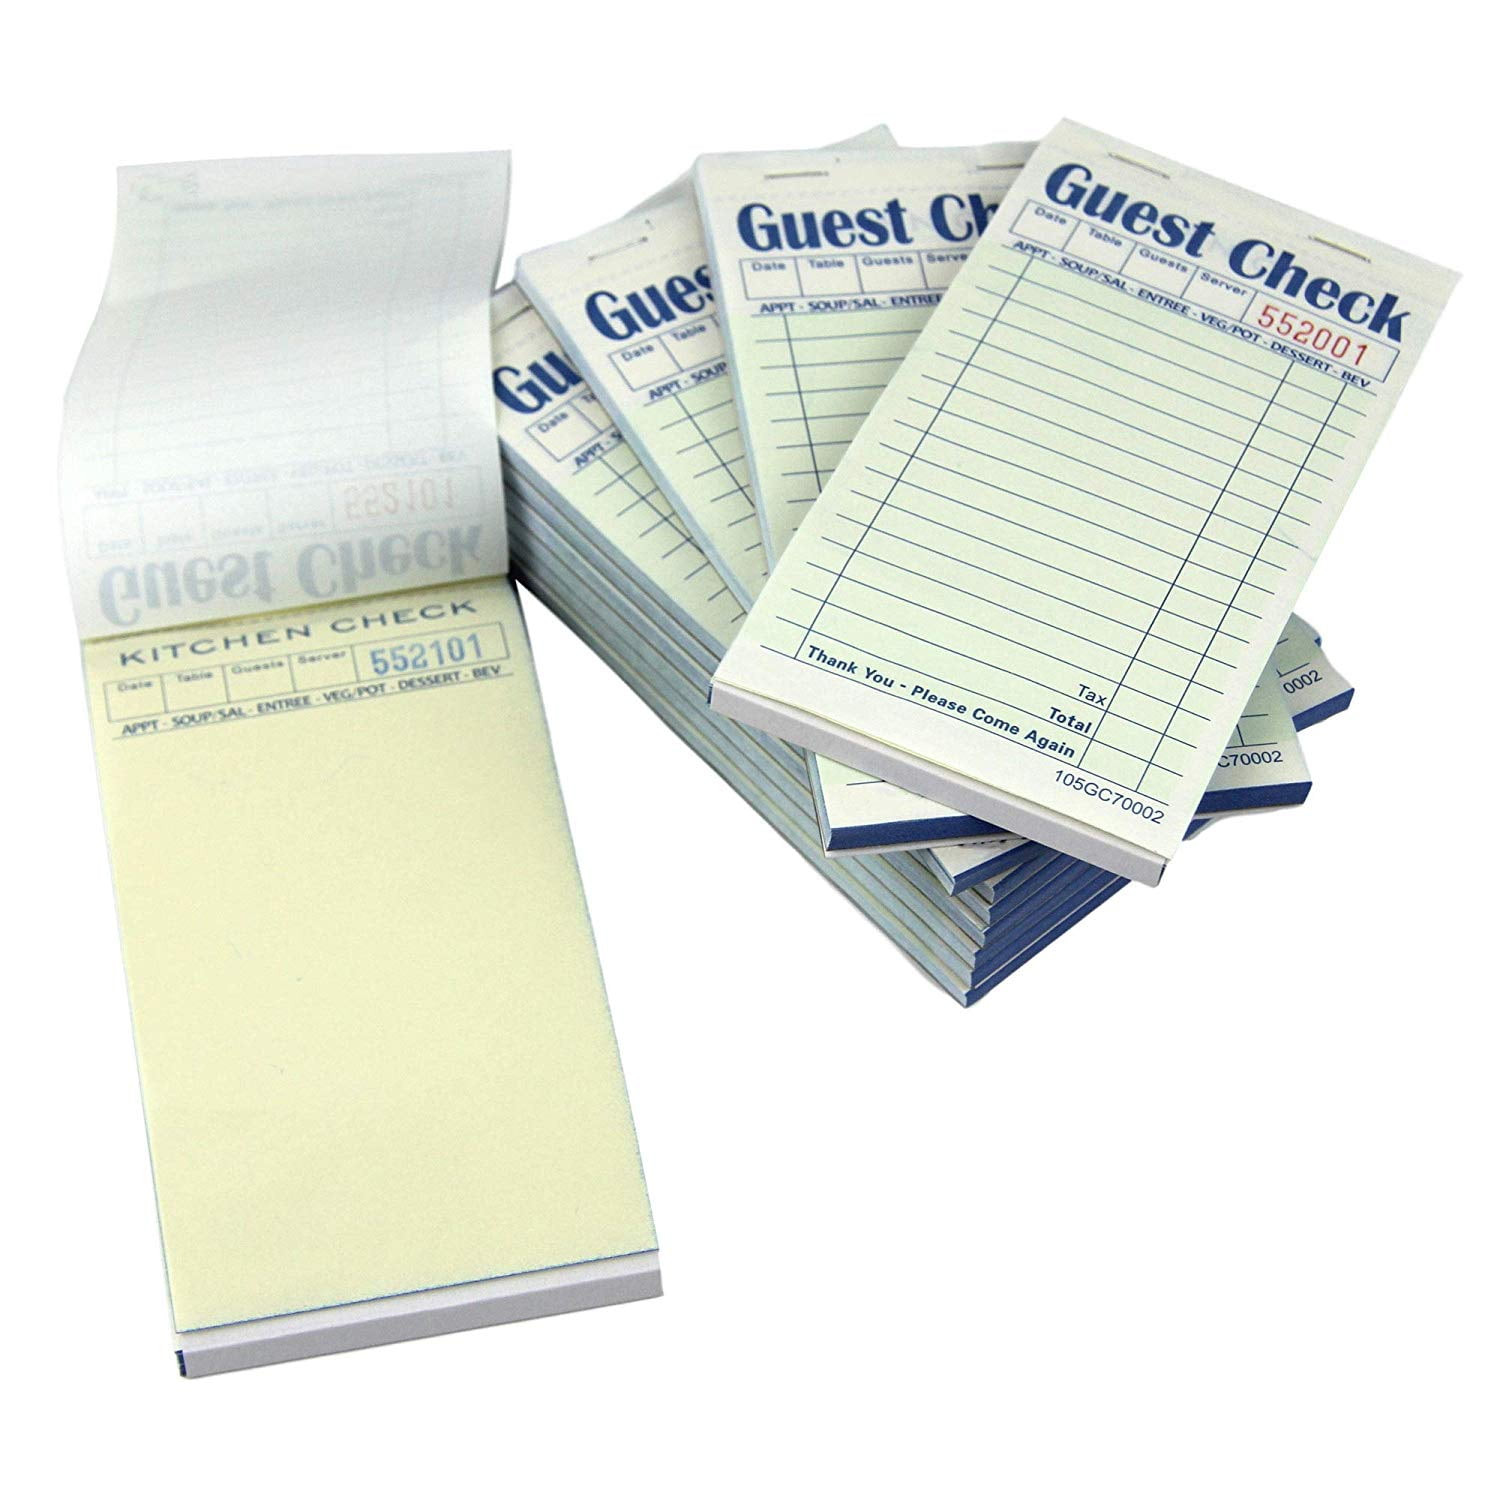 50 Sets per Pad - New Guest Check Pads Carbonless 104-50SW 10 Pack White/Canary 2-Part 3-3/8 x 6-3/8 